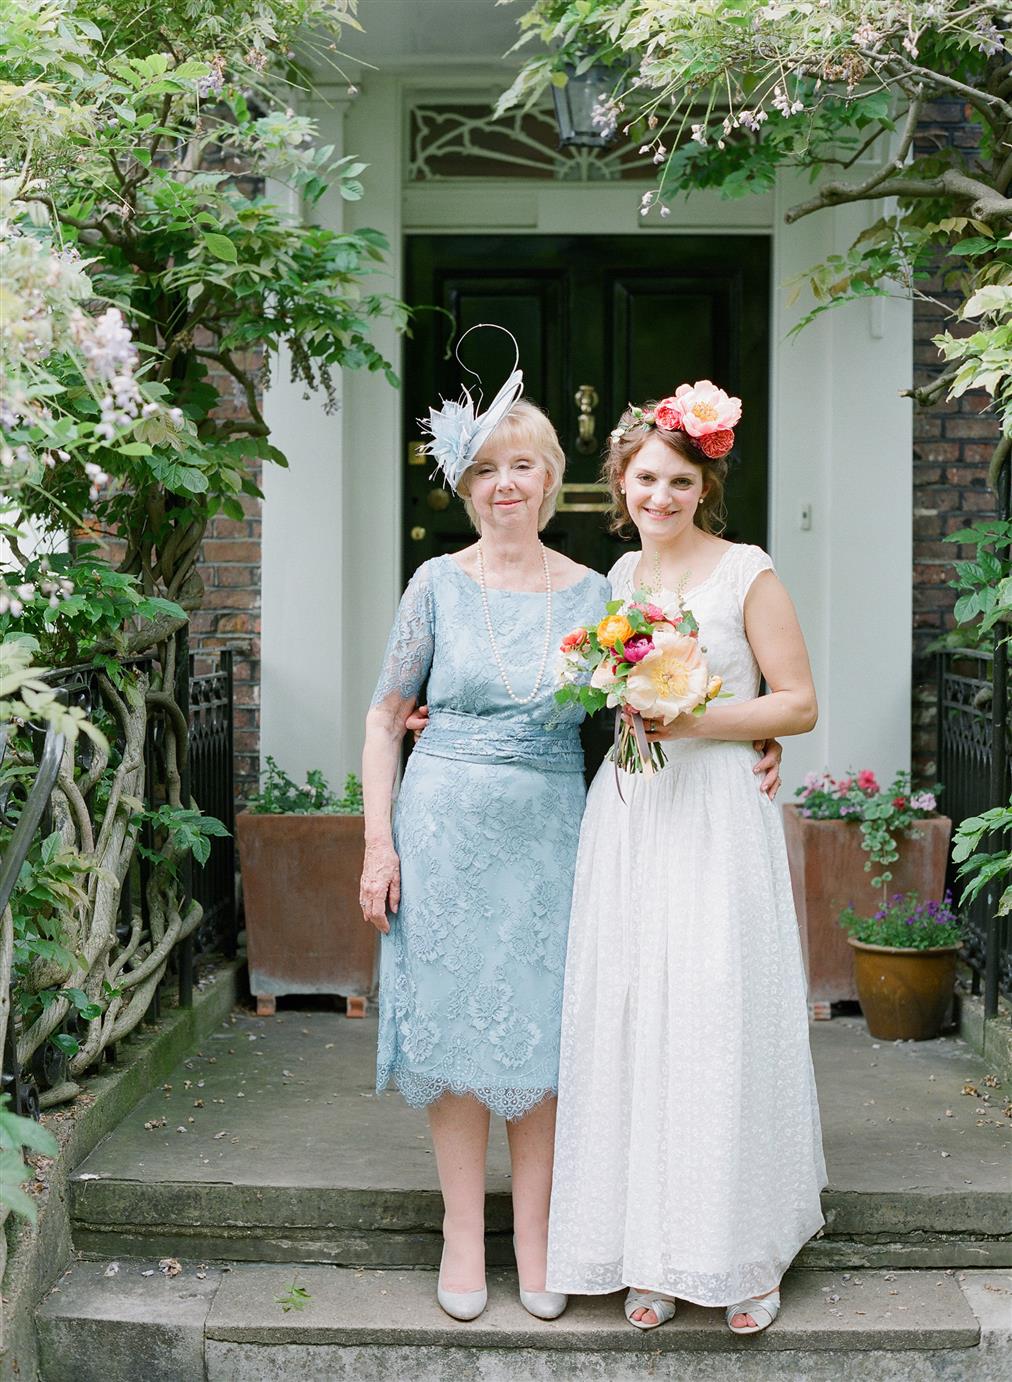 Bride & Mum - A 1940s Wedding Dress for a Sweet Early Summer Wedding from Taylor & Porter Photography